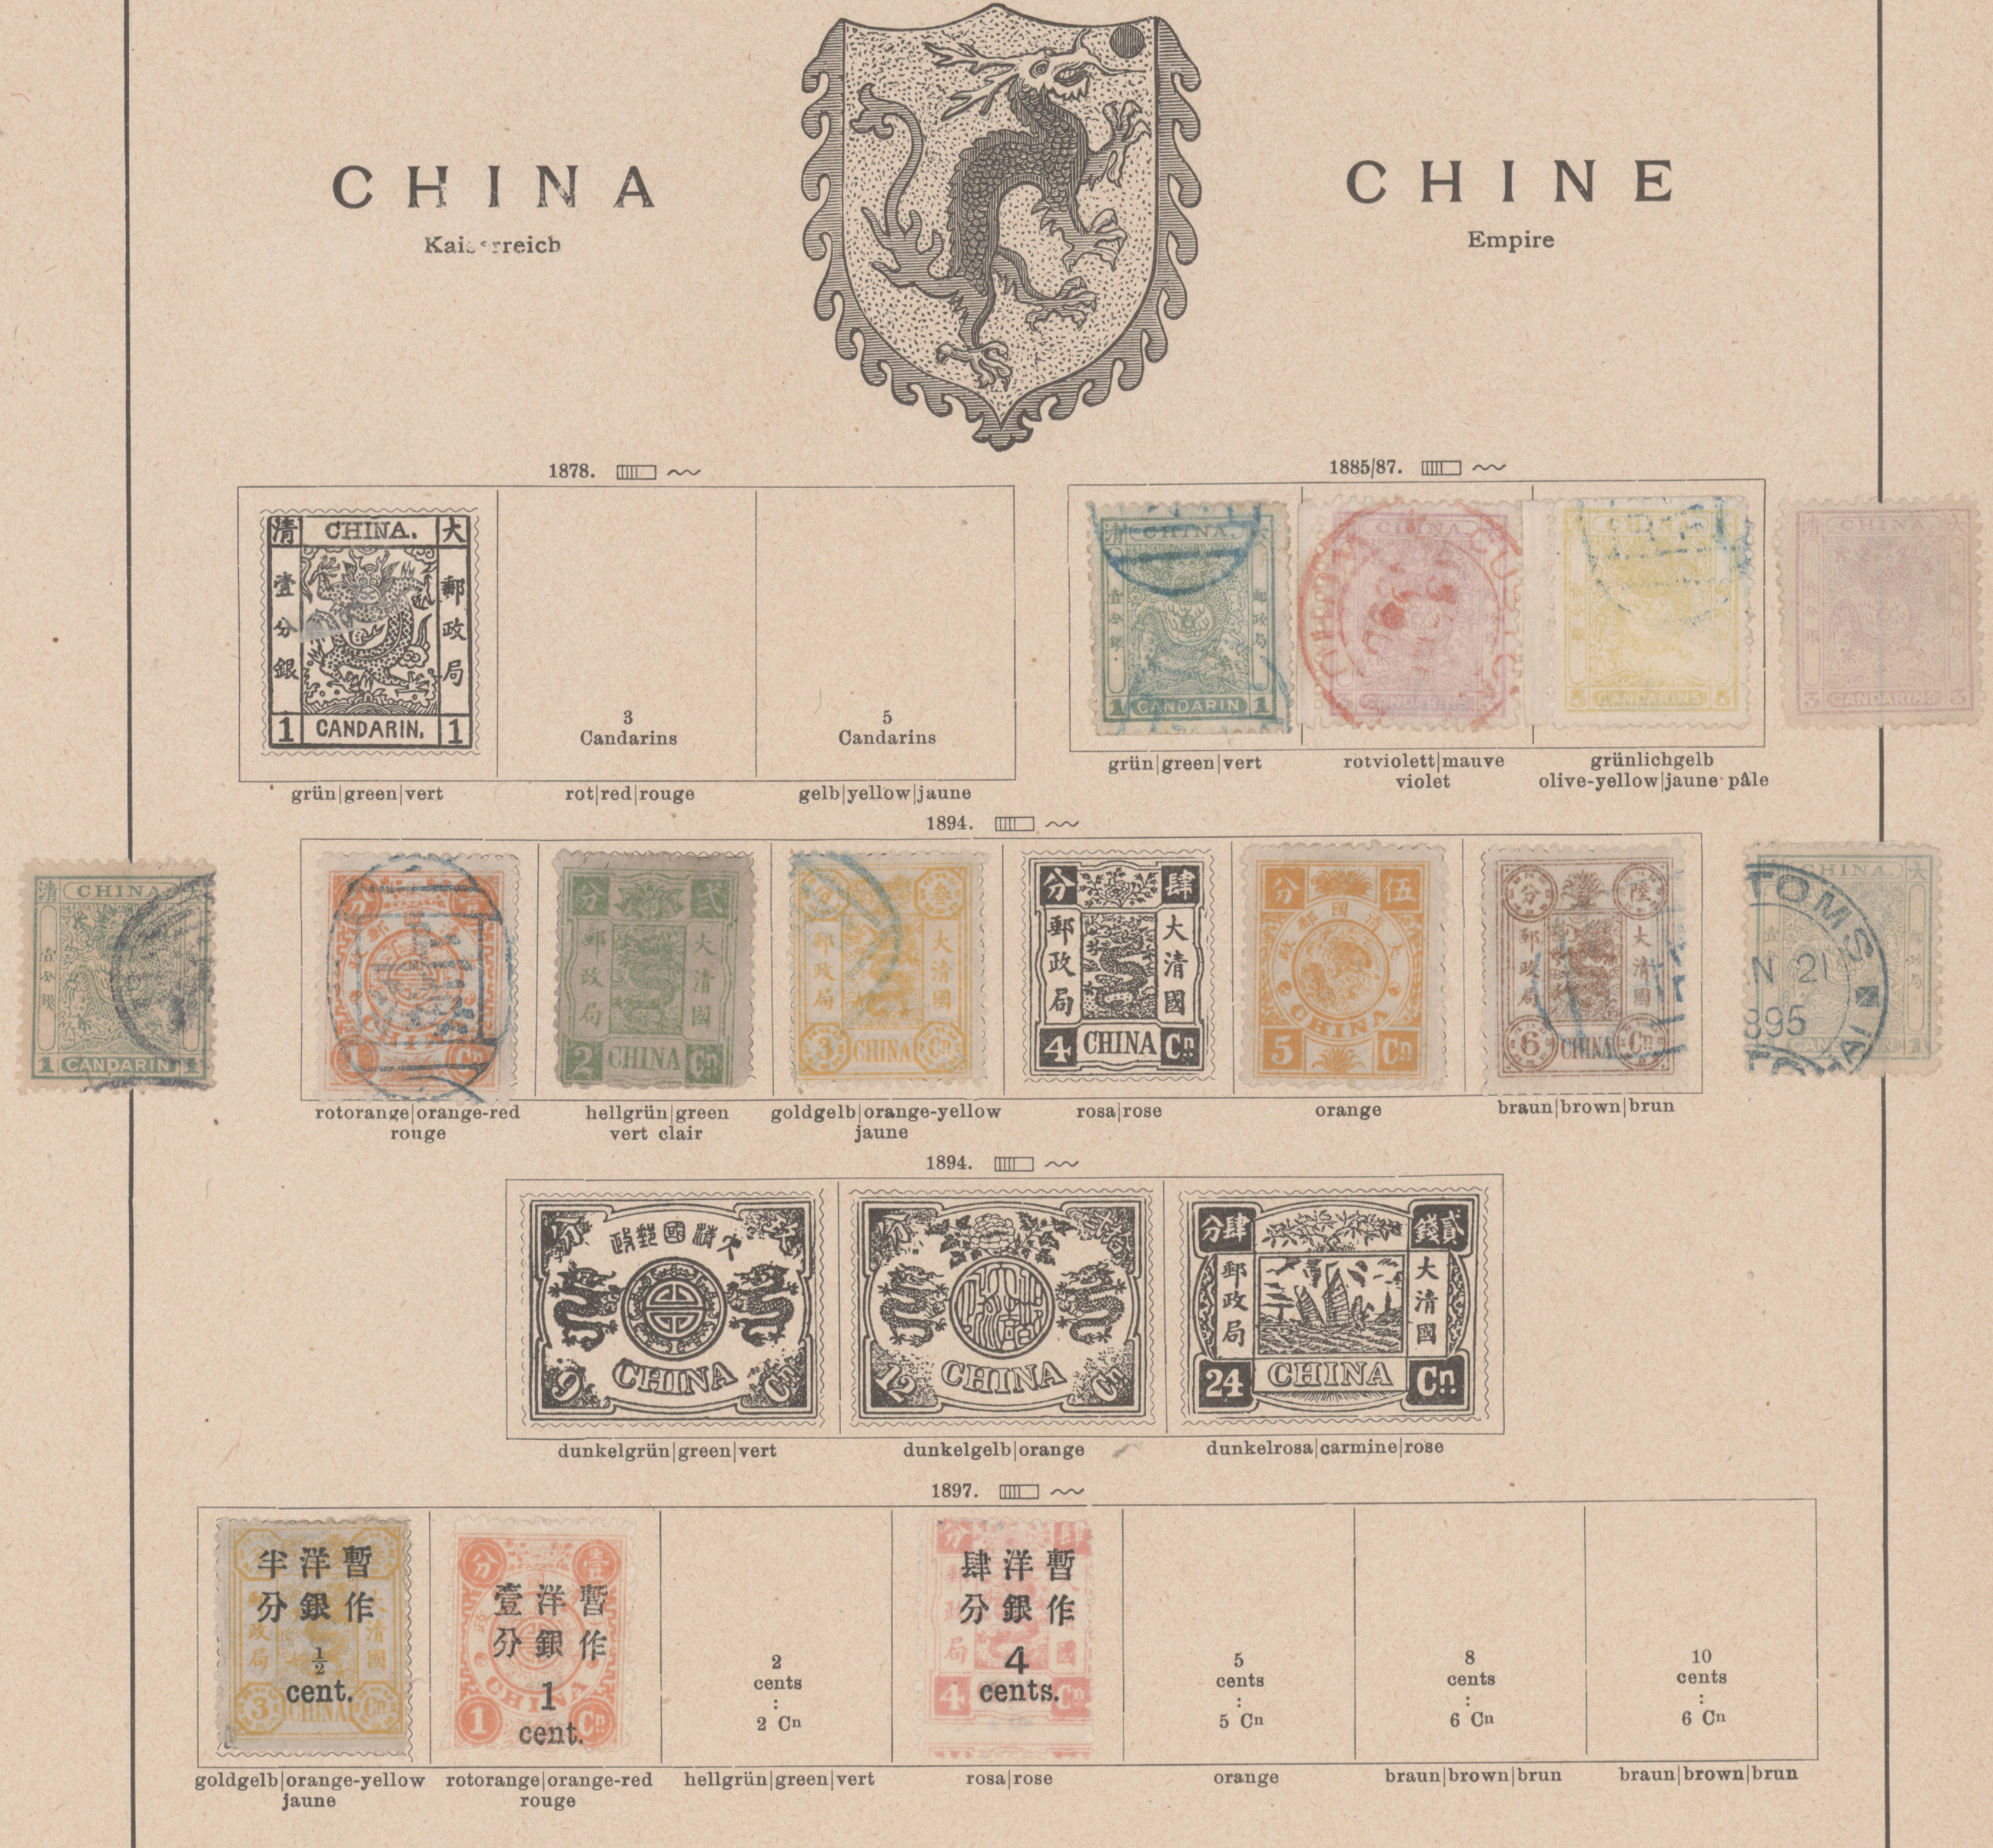 Lot 7176 - China  -  Auktionshaus Christoph Gärtner GmbH & Co. KG 54th AUCTION - Day 4